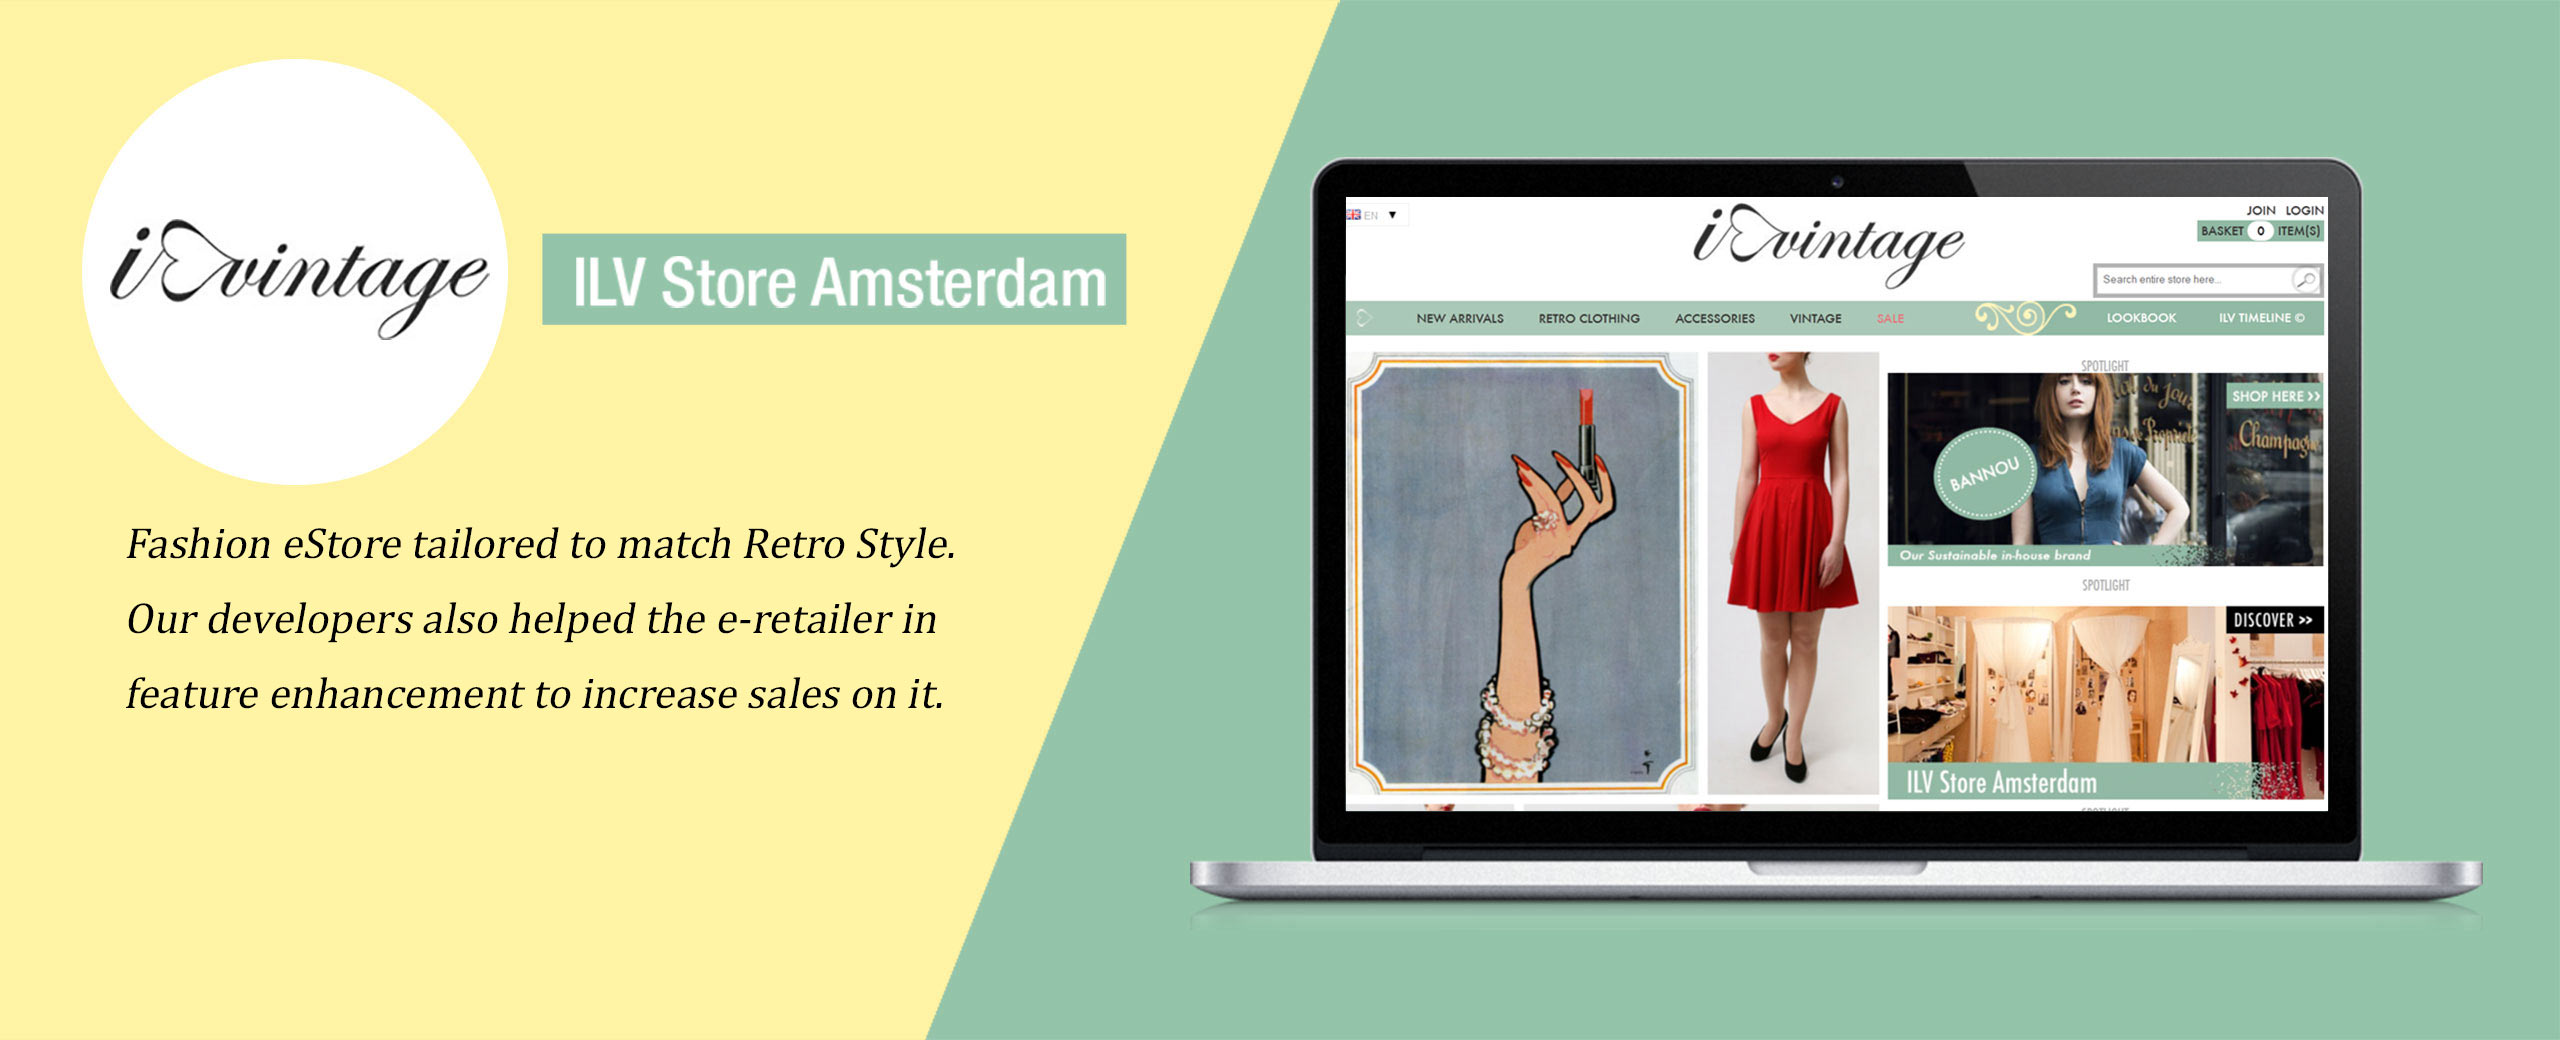 Fashion eStore tailored to match Retro Style. Our developers also helped the e-retailer in feature enhancement to increase sales on it.